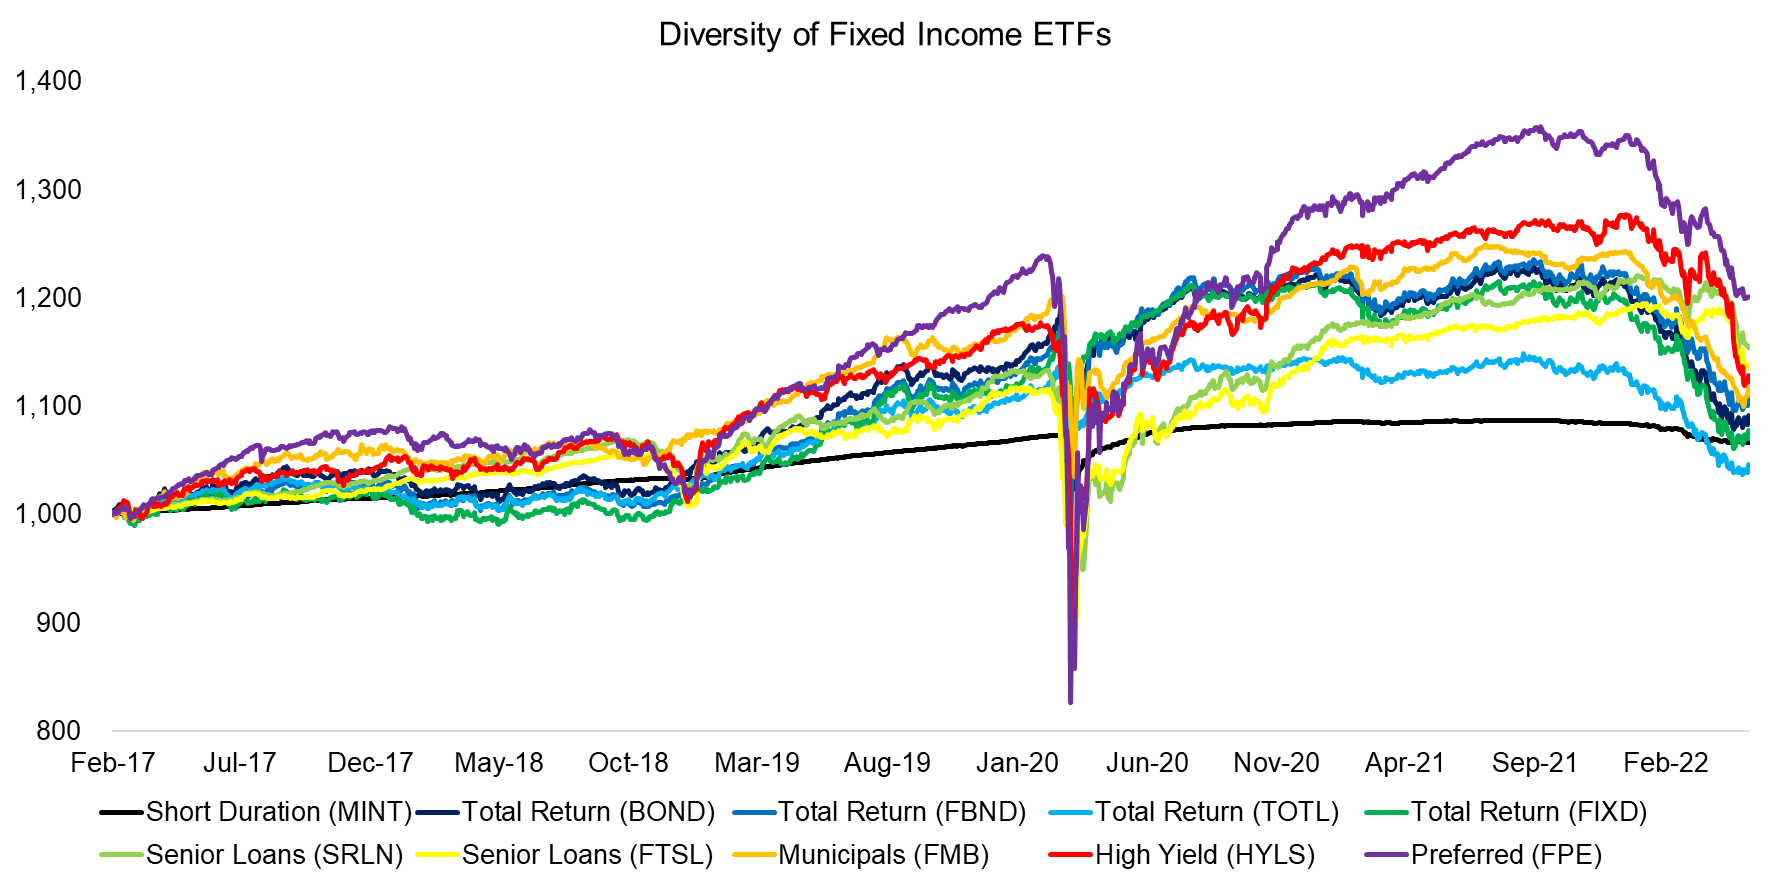 Diversity of Fixed Income ETFs